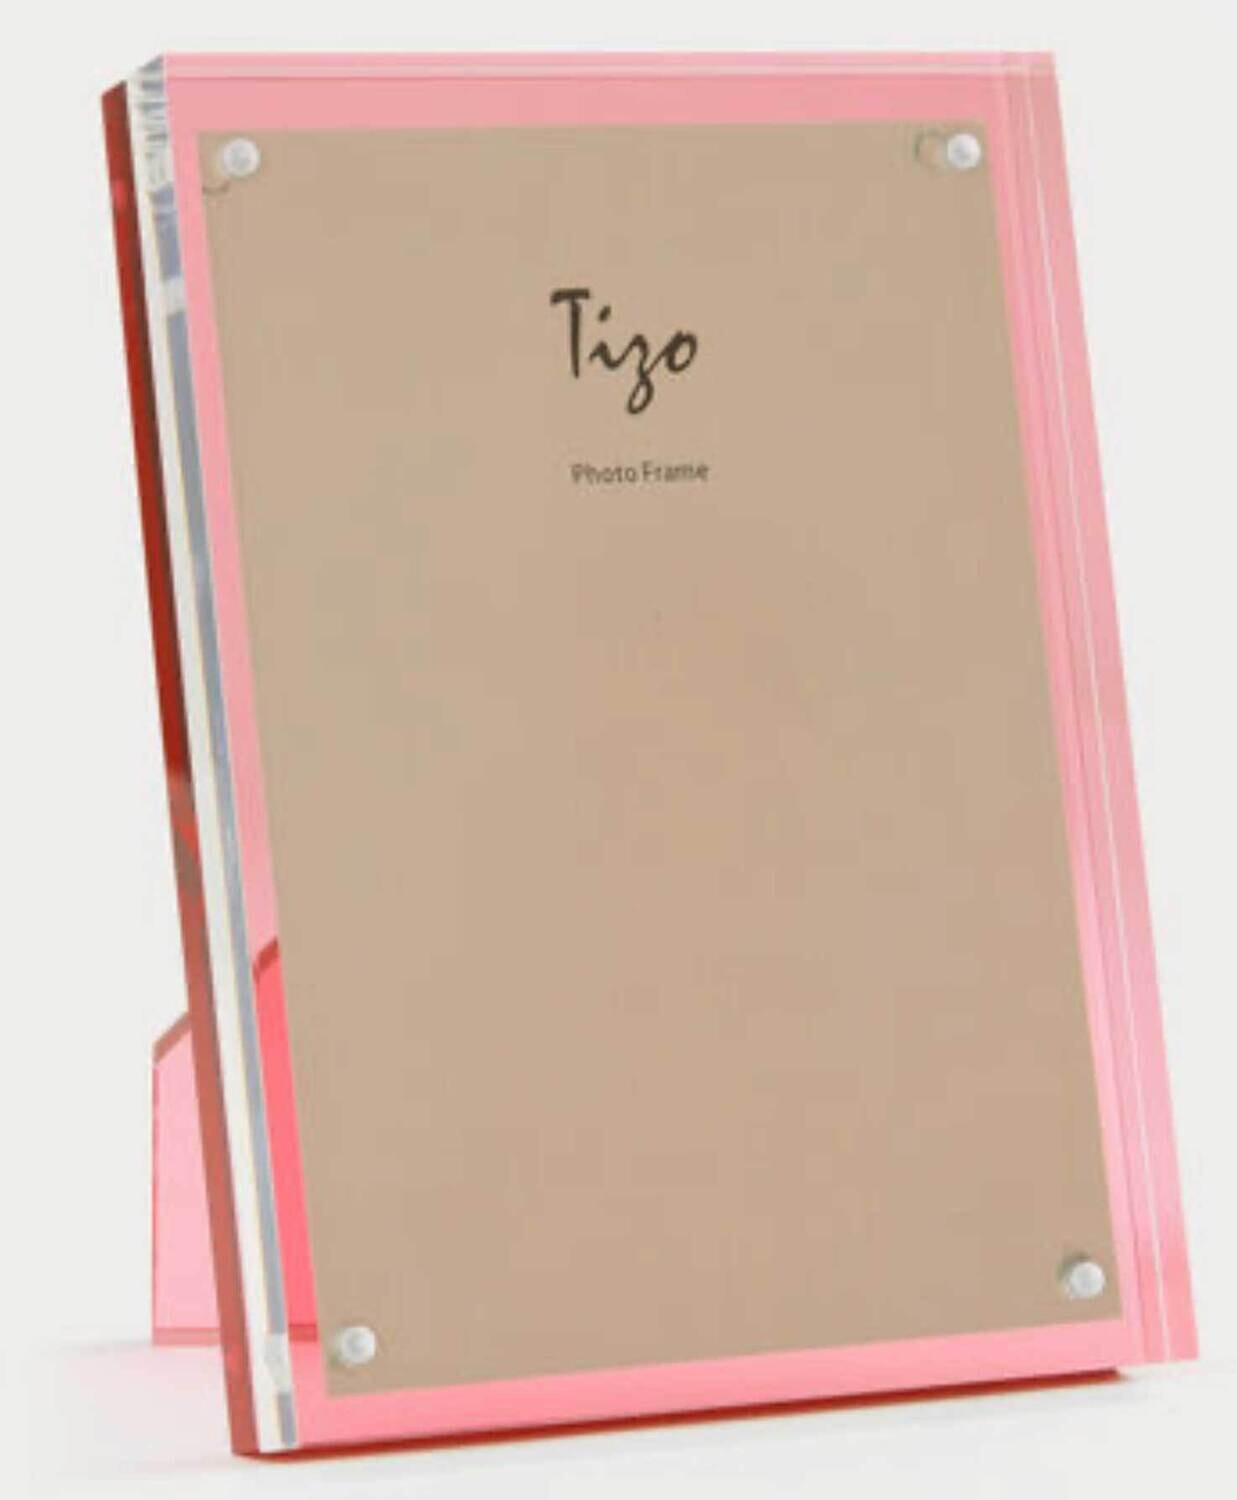 Tizo Pink Back 4 x 6 Inch Lucite Picture Frame HA159PK46